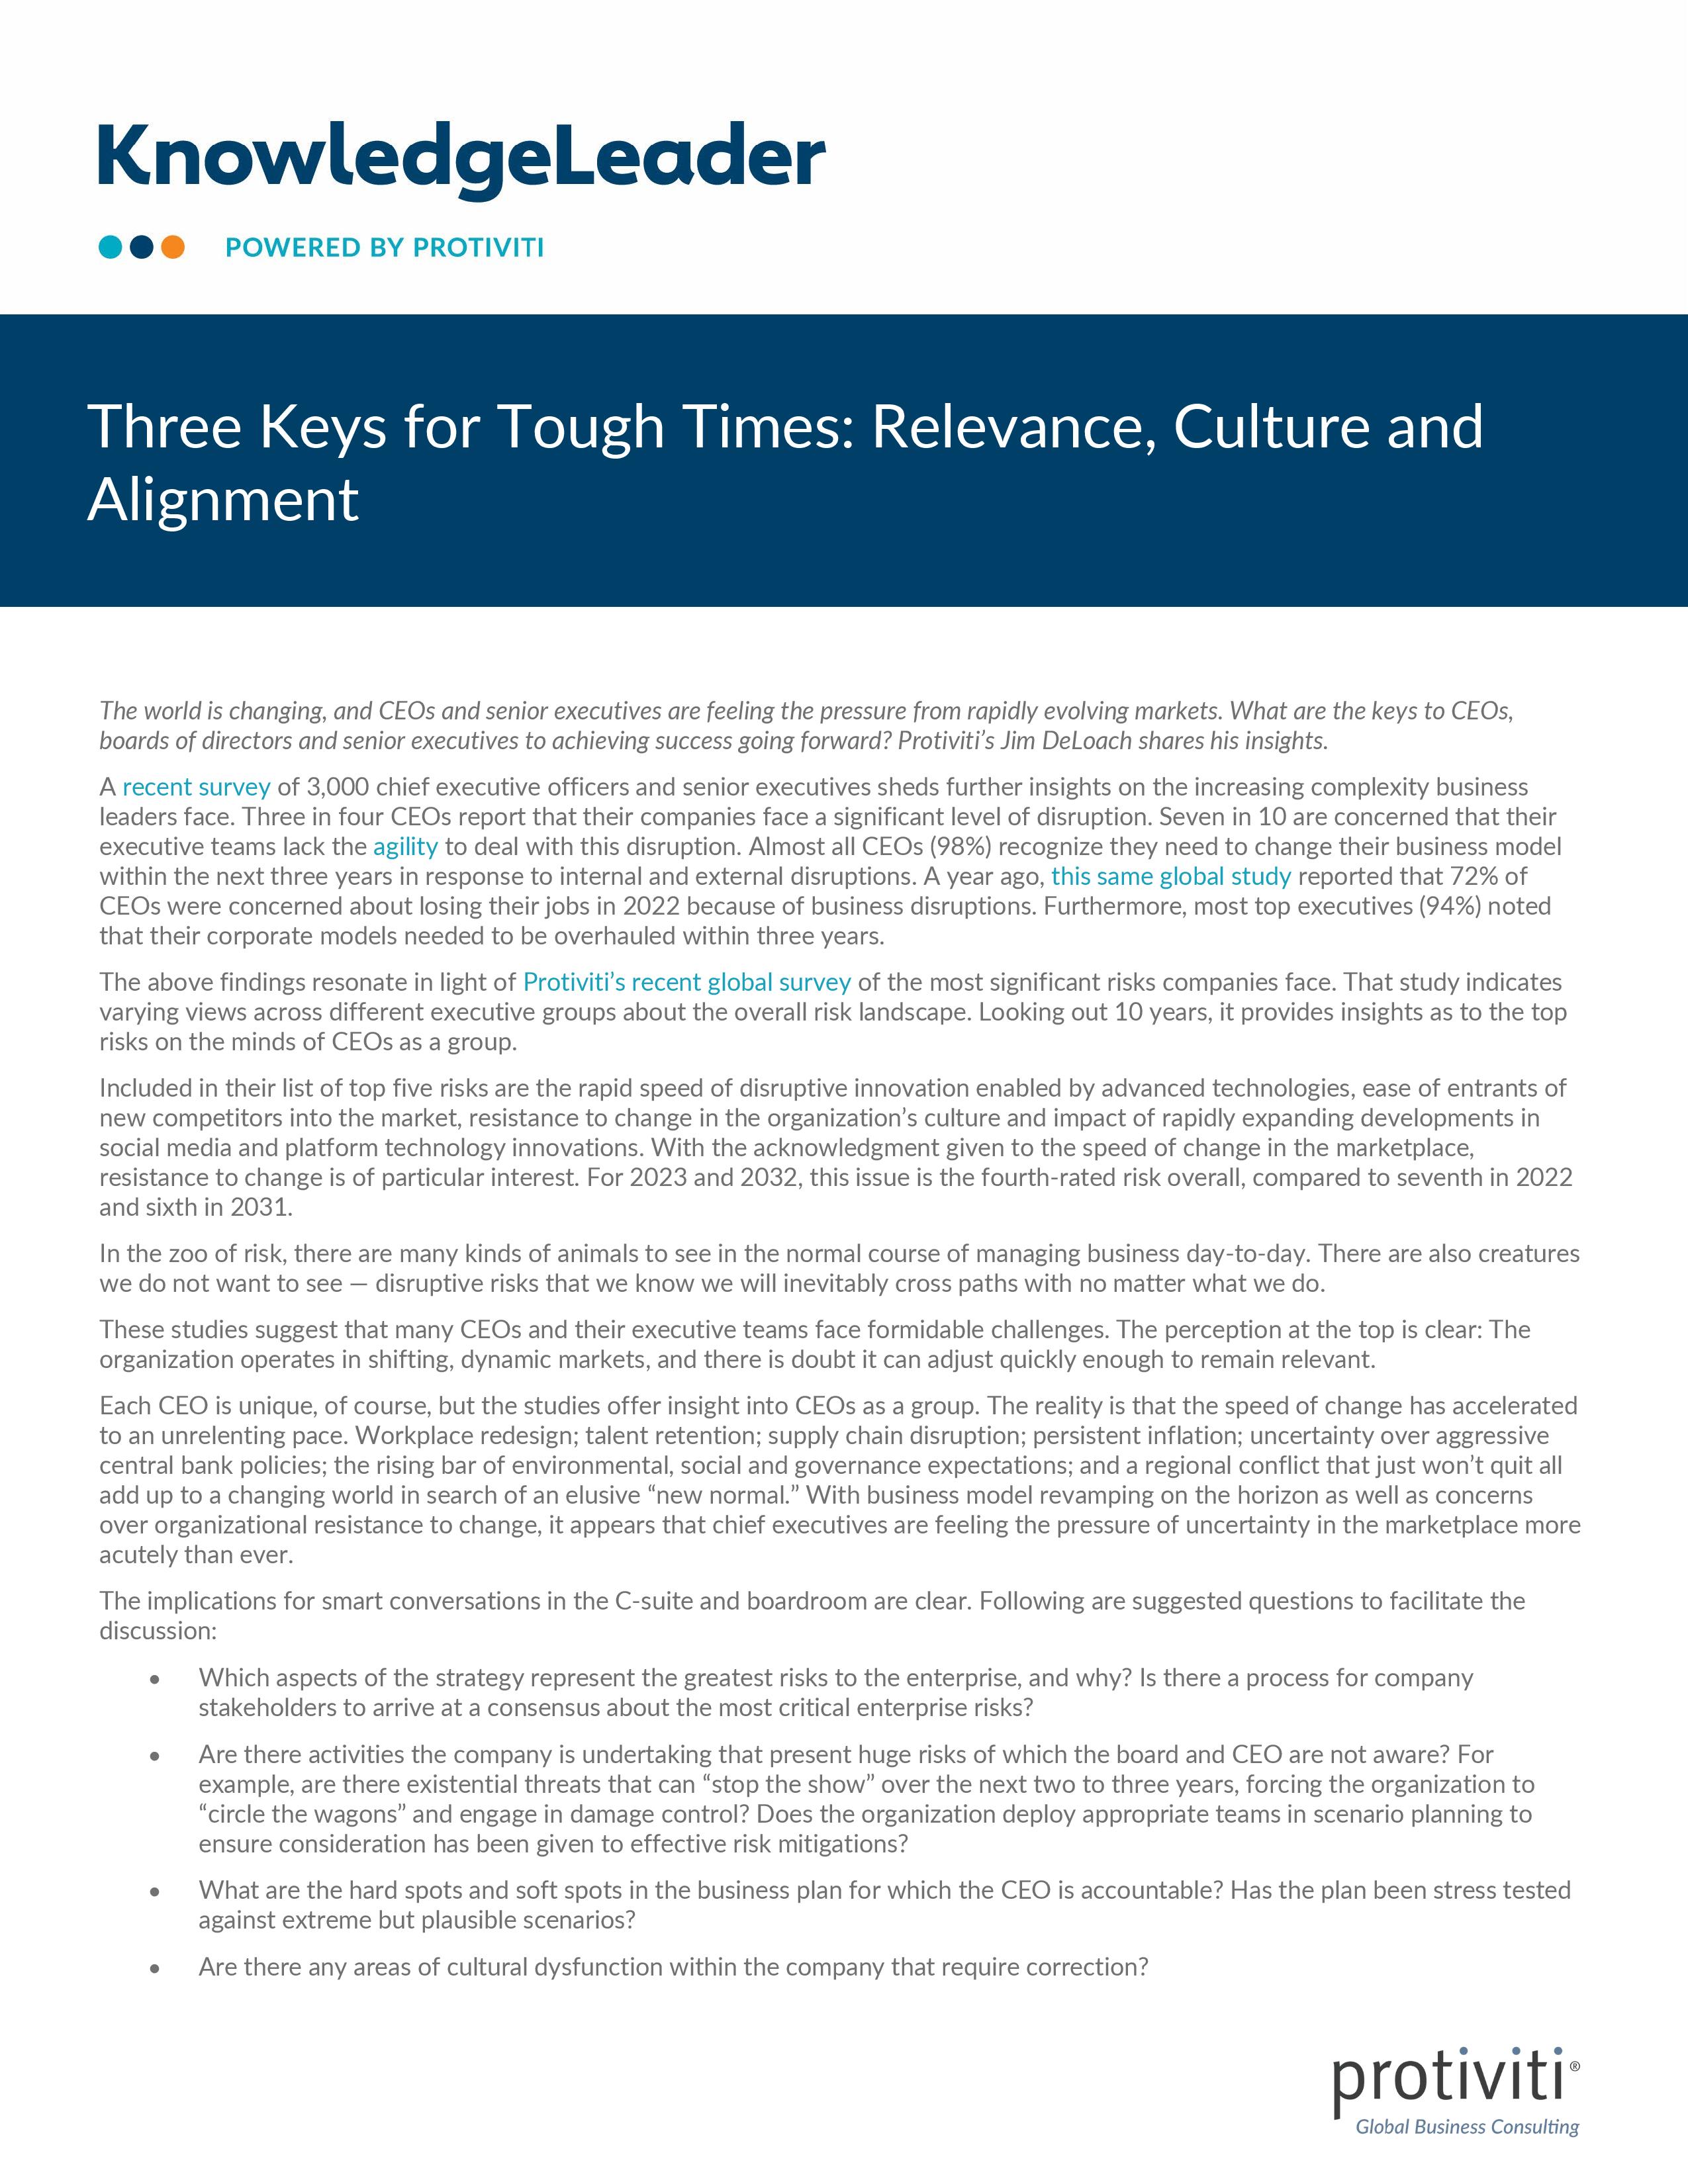 Screenshot of the first page of Three Keys for Tough Times Relevance, Culture and Alignment